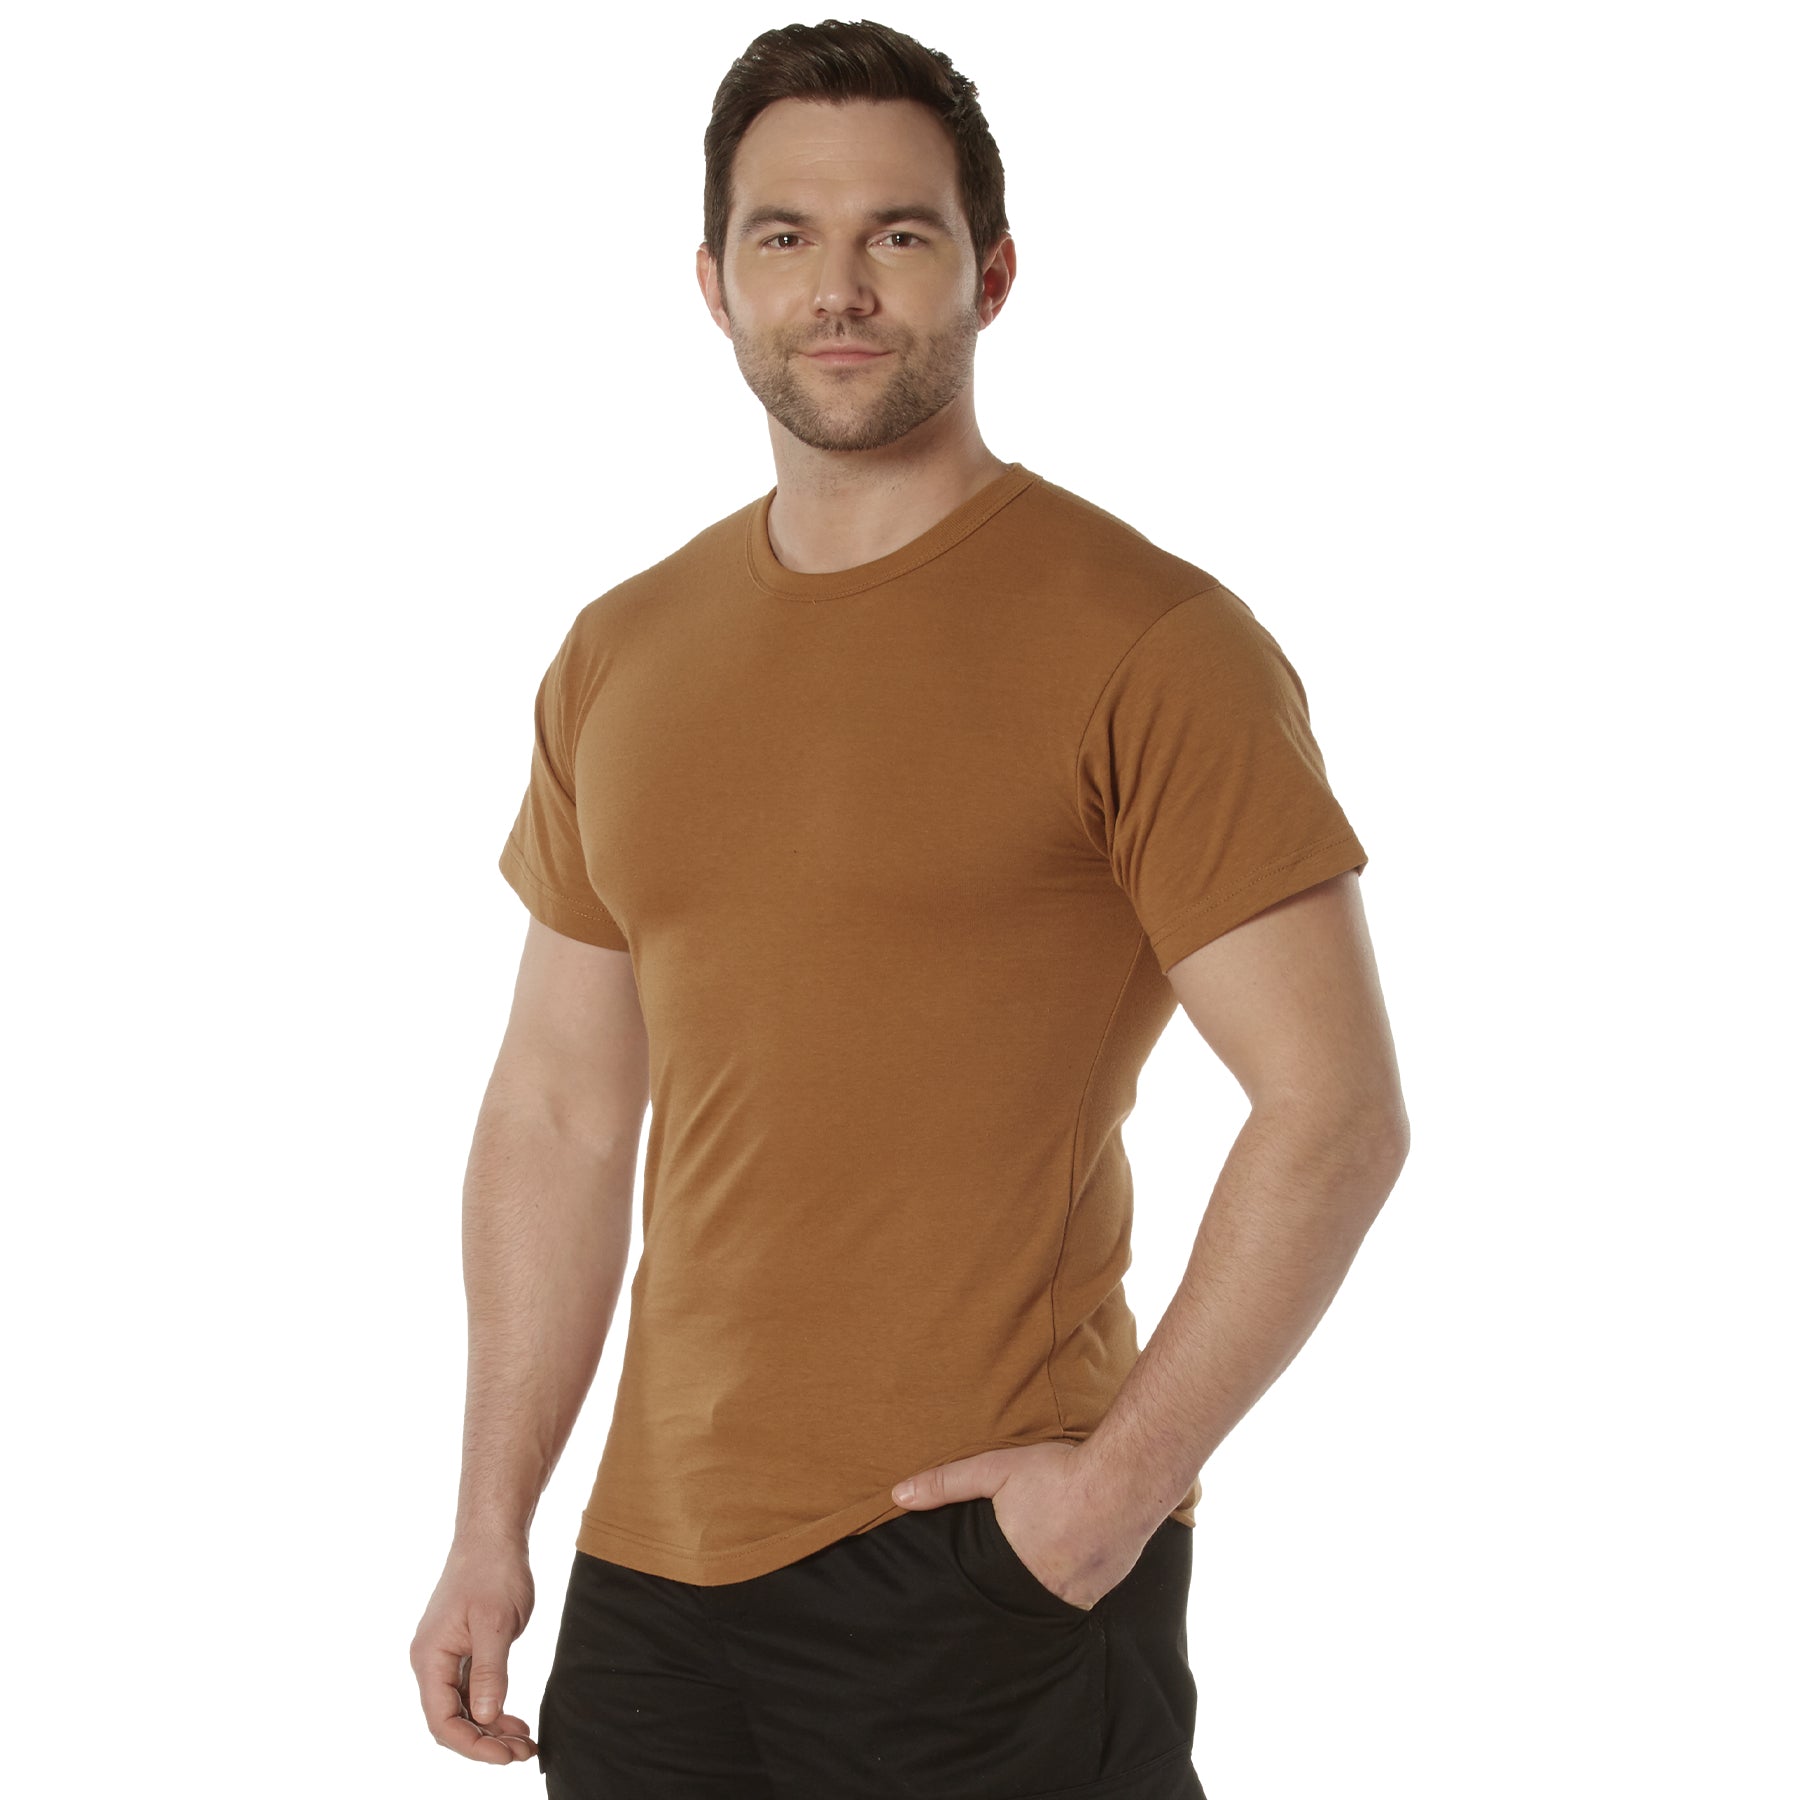 [AR 670-1][Military] Poly/Cotton T-Shirts Work Brown